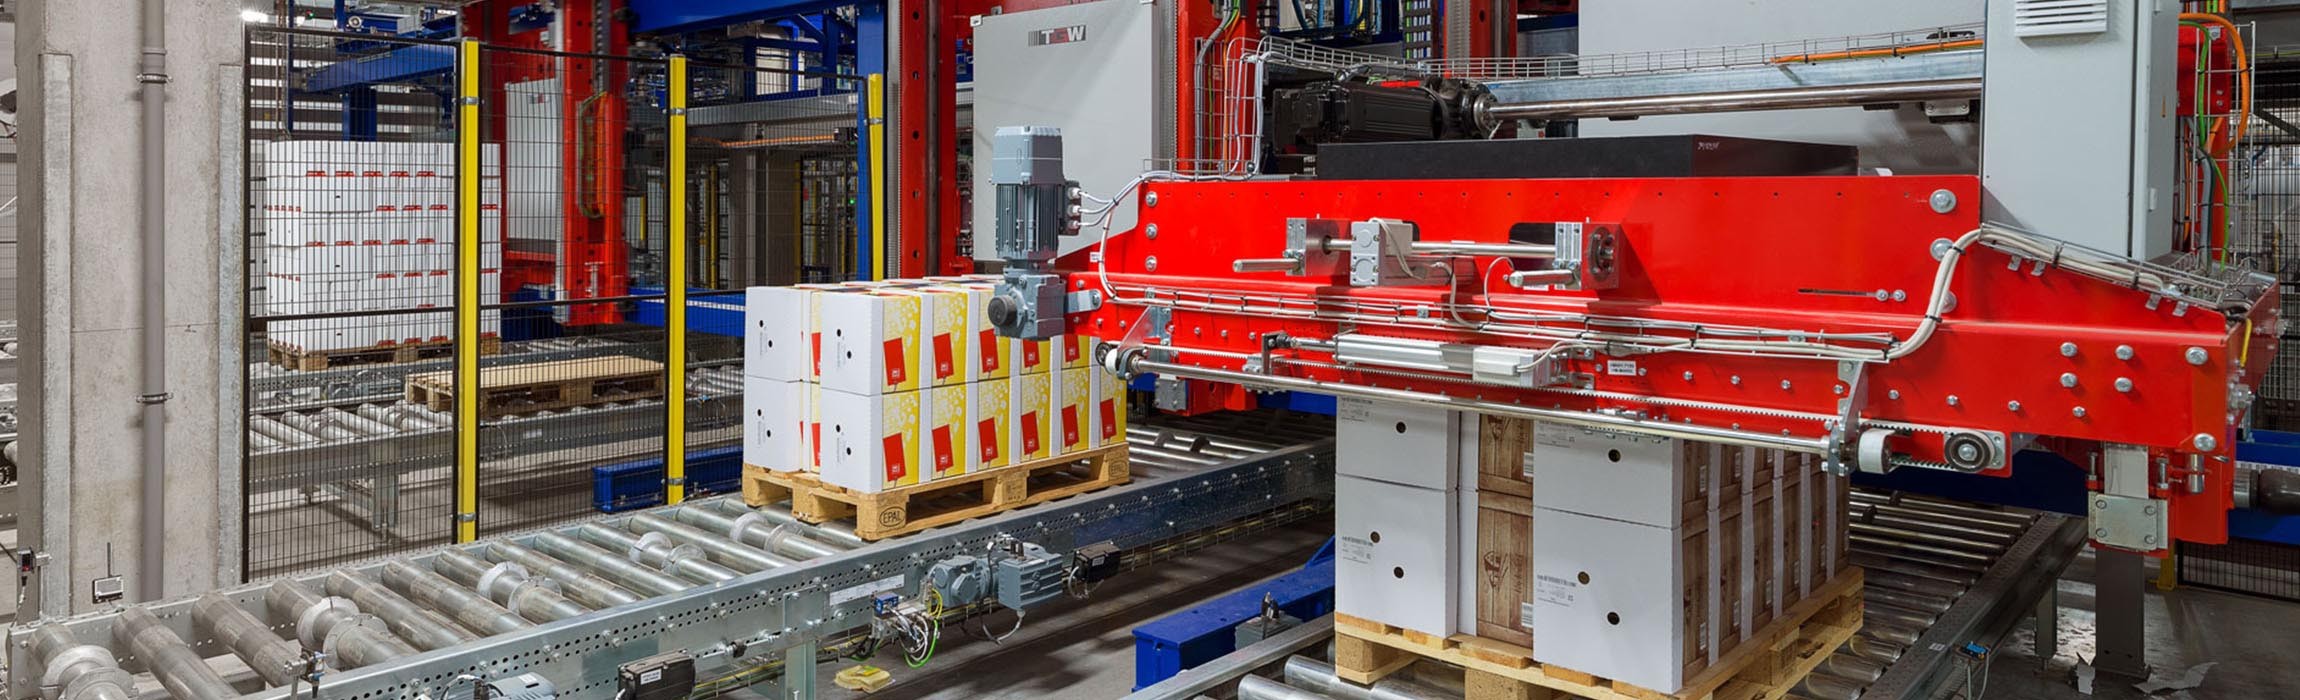 Thanks to the central palletising system, Heinrichsthaler was able to double its output to 100 pallets per hour.